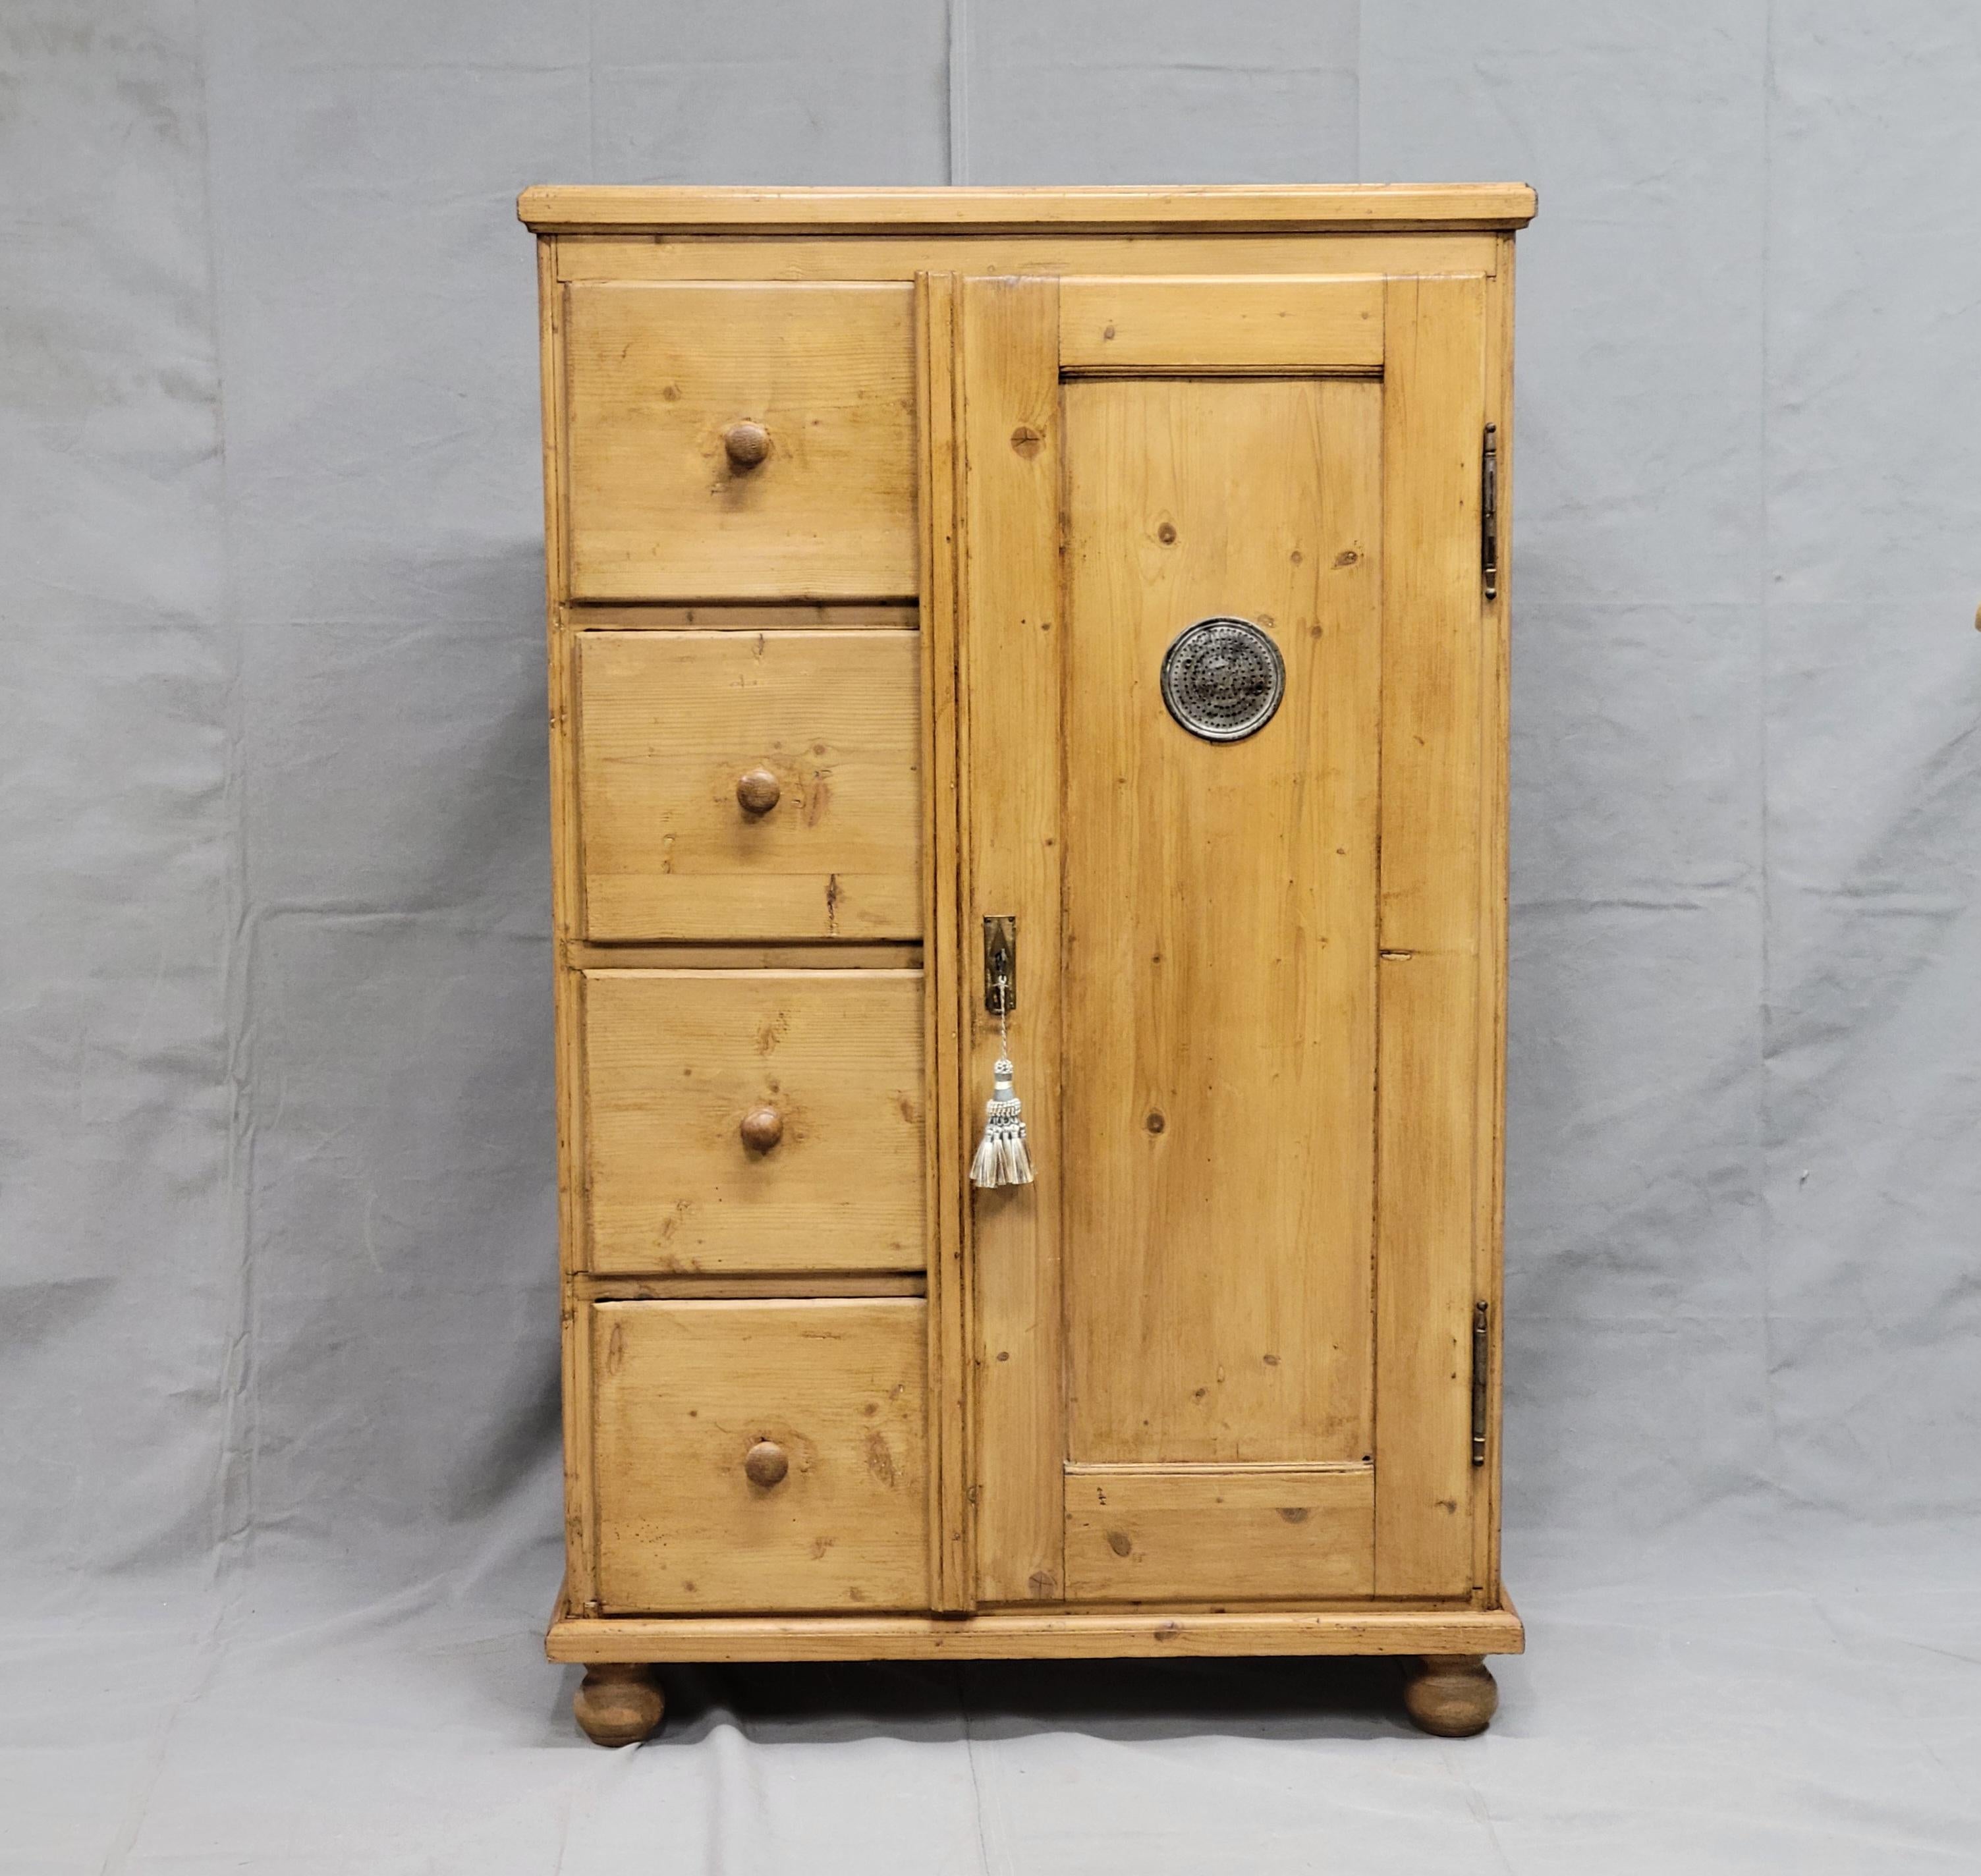 A beautiful, rustic antique pine larder or pie cabinet cupboard that dates from the late 1800s in Eastern Europe (Germany / Czech Republic / Slovakia). These cabinets were used in kitchens prior to refrigeration. It is in good condition for its age